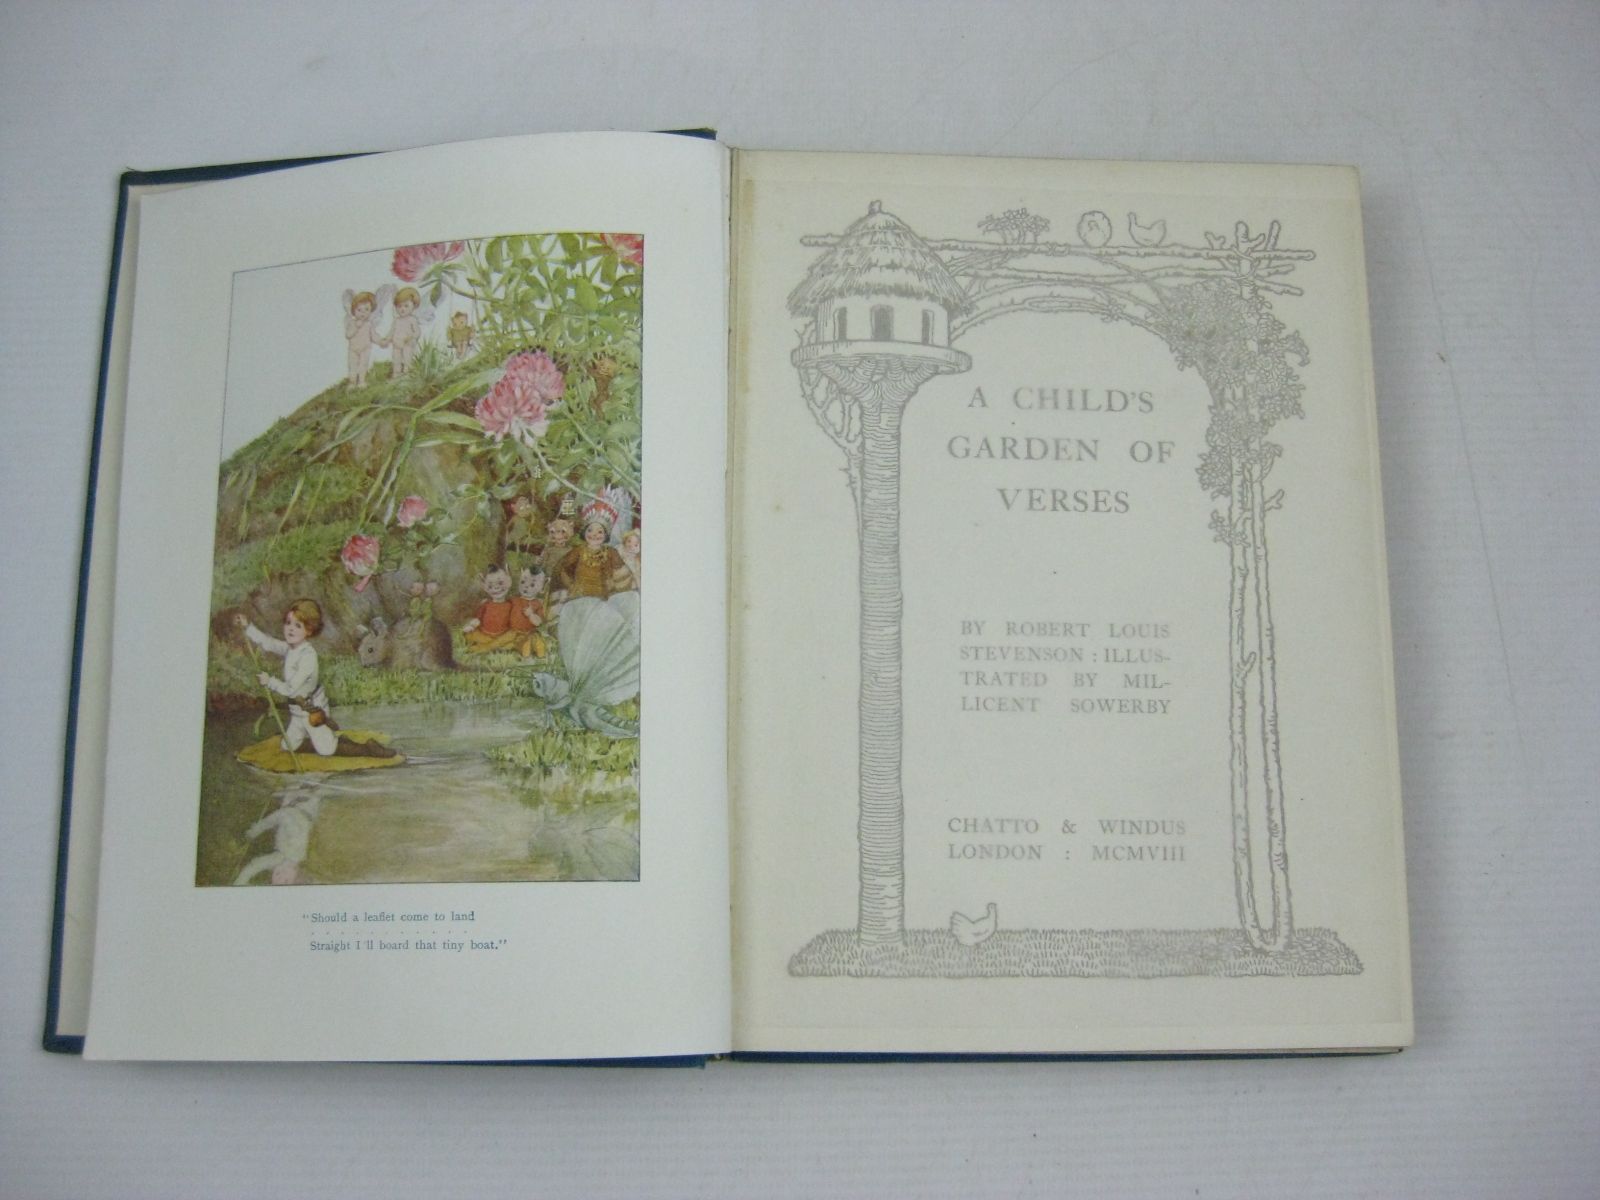 Photo of A CHILD'S GARDEN OF VERSES written by Stevenson, Robert Louis illustrated by Sowerby, Millicent published by Chatto & Windus (STOCK CODE: 1404868)  for sale by Stella & Rose's Books